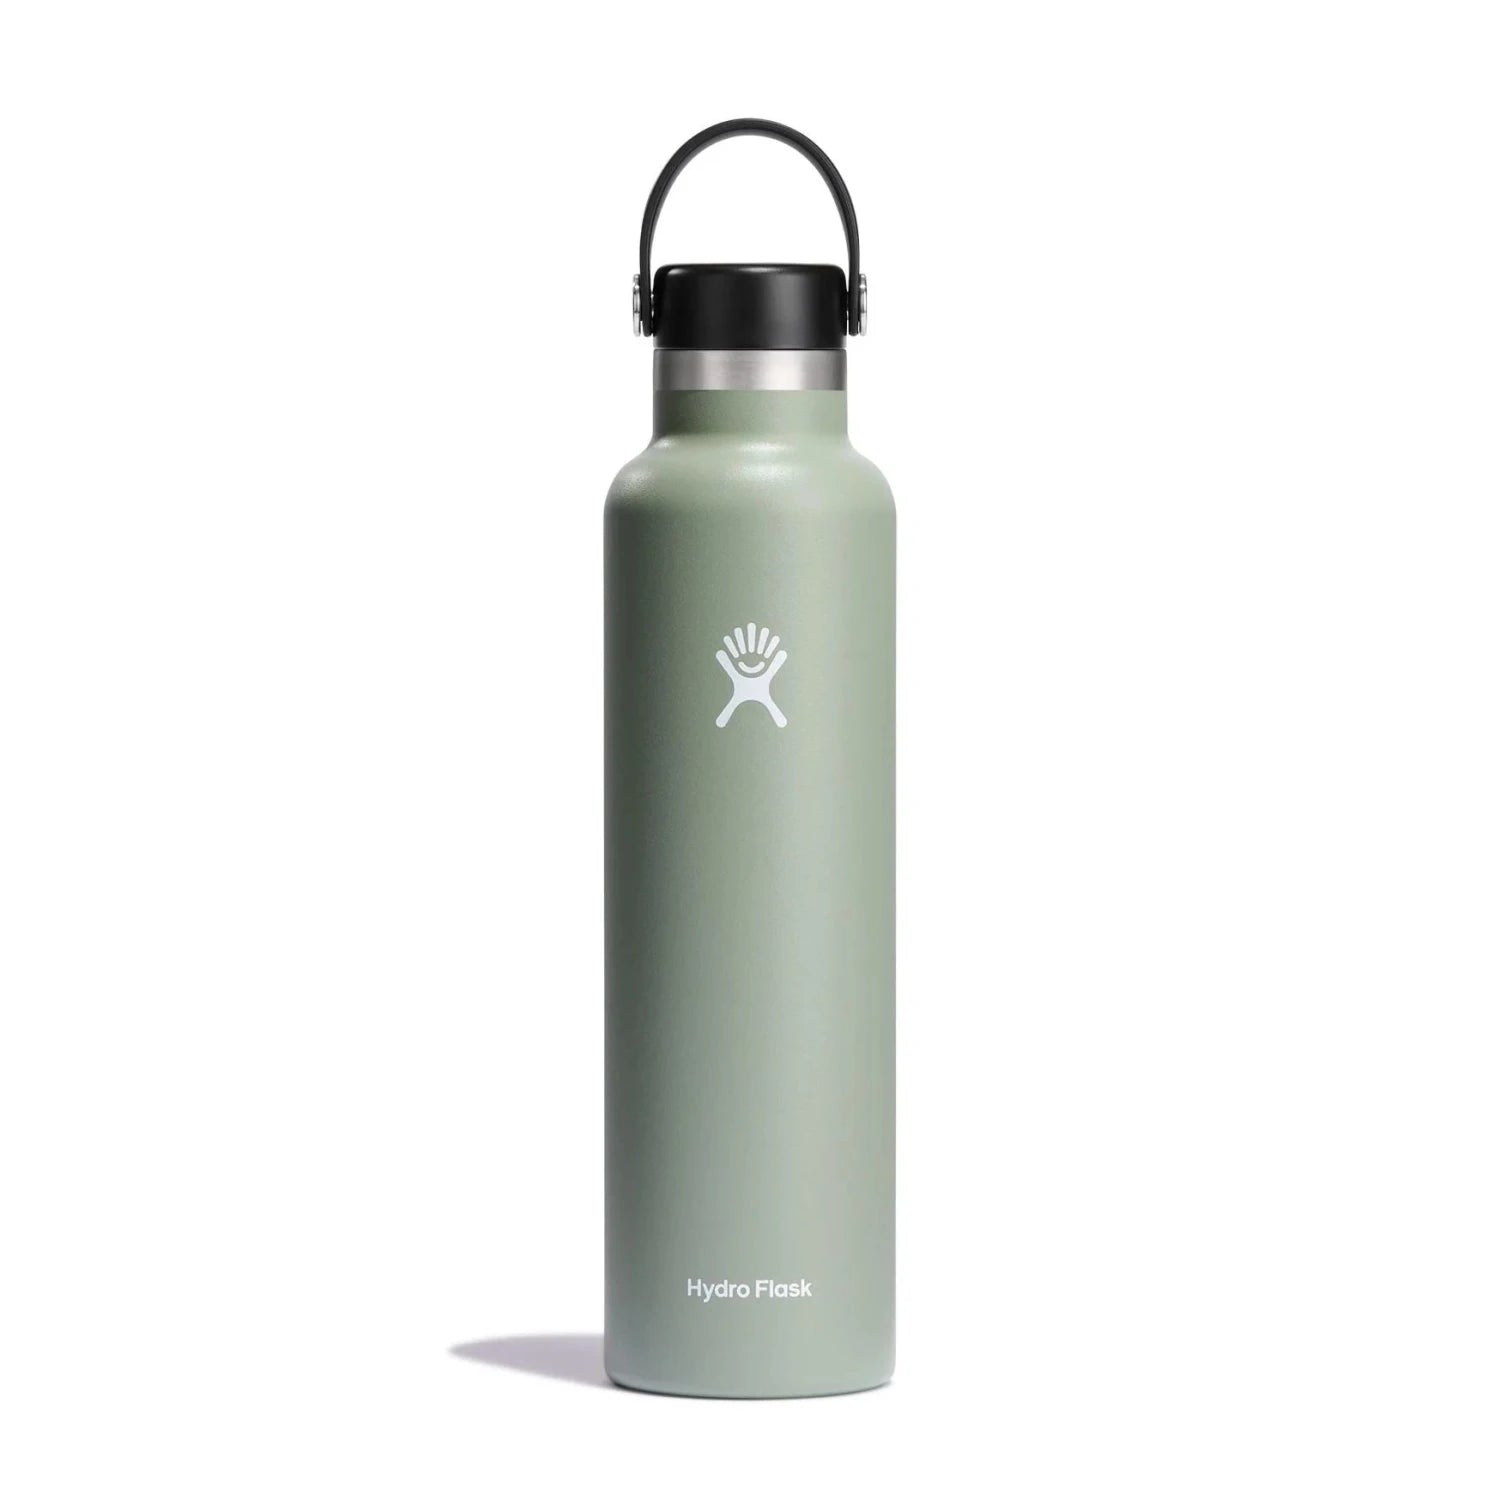 Hydro Flask 24 oz Standard Mouth Flex Cap shown in the Agave color option.